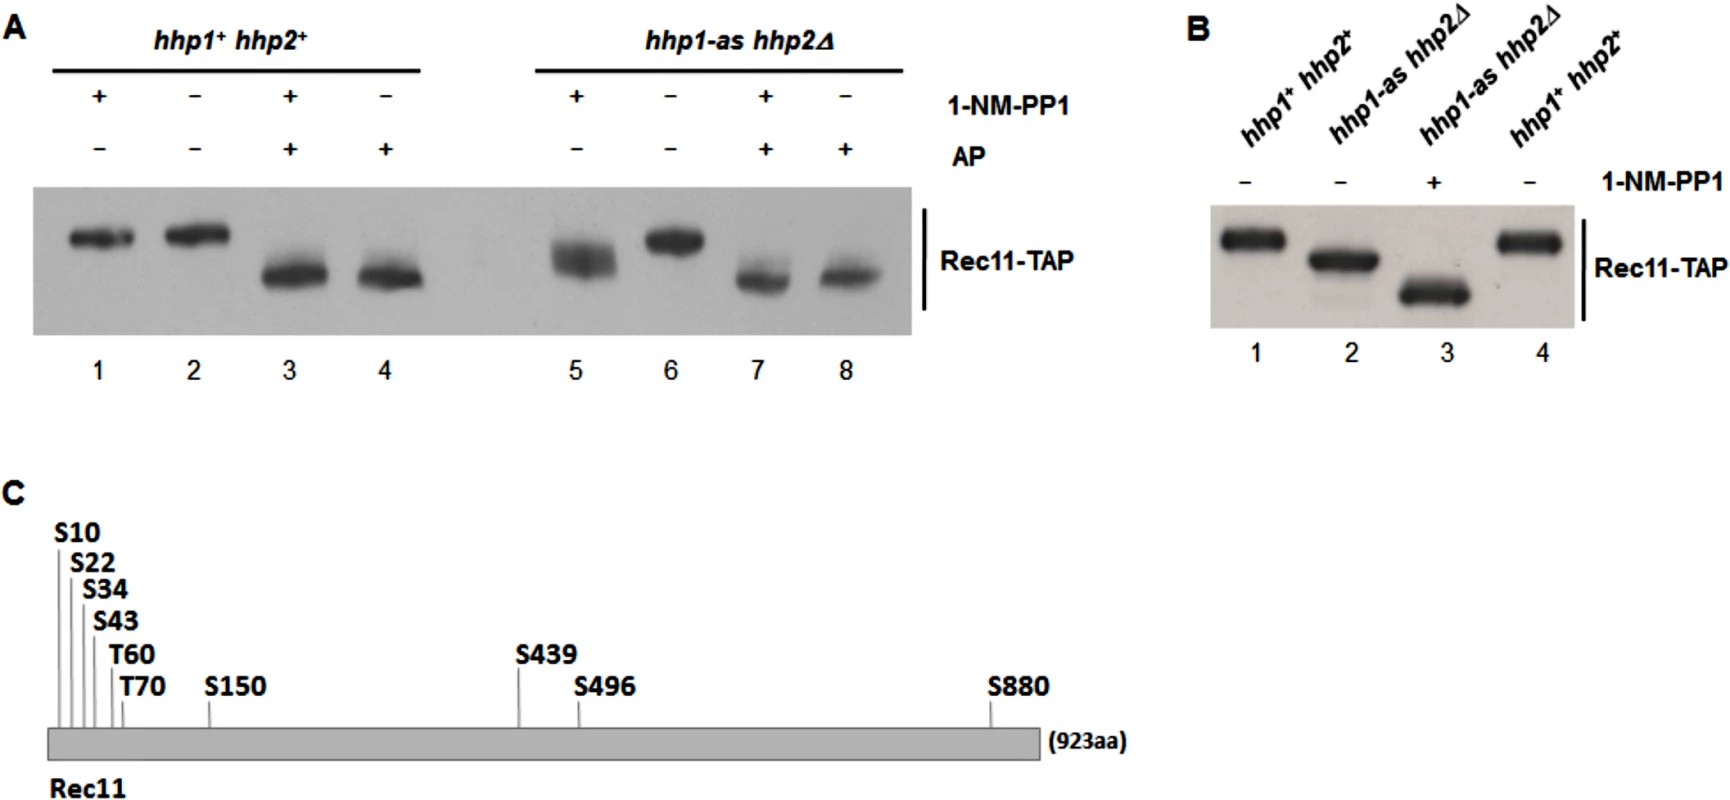 Rec11 is phosphorylated during meiosis, at least partially dependent on Hhp.